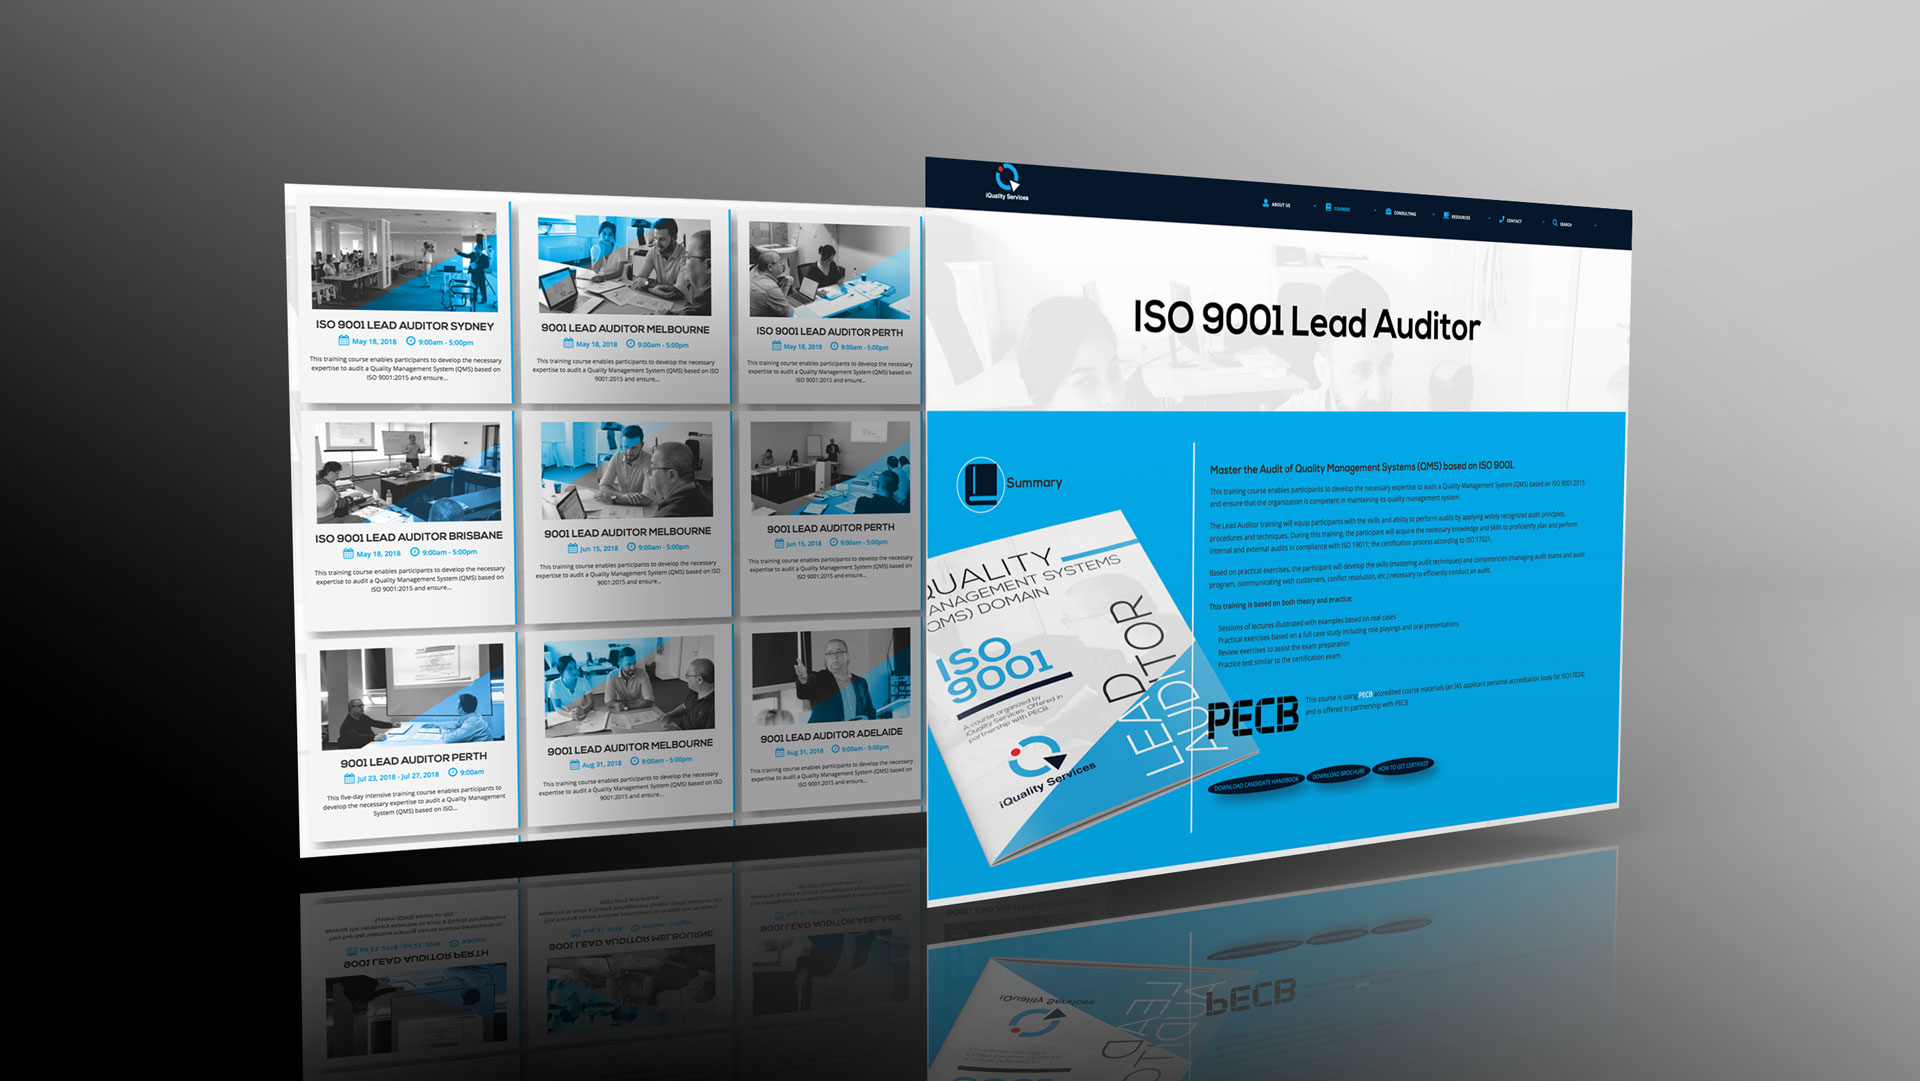 This illustration, created by PixelUp, features two isometric desktop screens placed against a backdrop of dark grey linear gradient. Each screen displays the webpage for the 'ISO 9001 Lead Auditor' course on iQuality Services' website. The course description is highlighted with a vibrant blue background. The images are primarily black and white, with a stylish blue accent on top. The iQuality Services Project is among the projects undertaken by PixelUp.